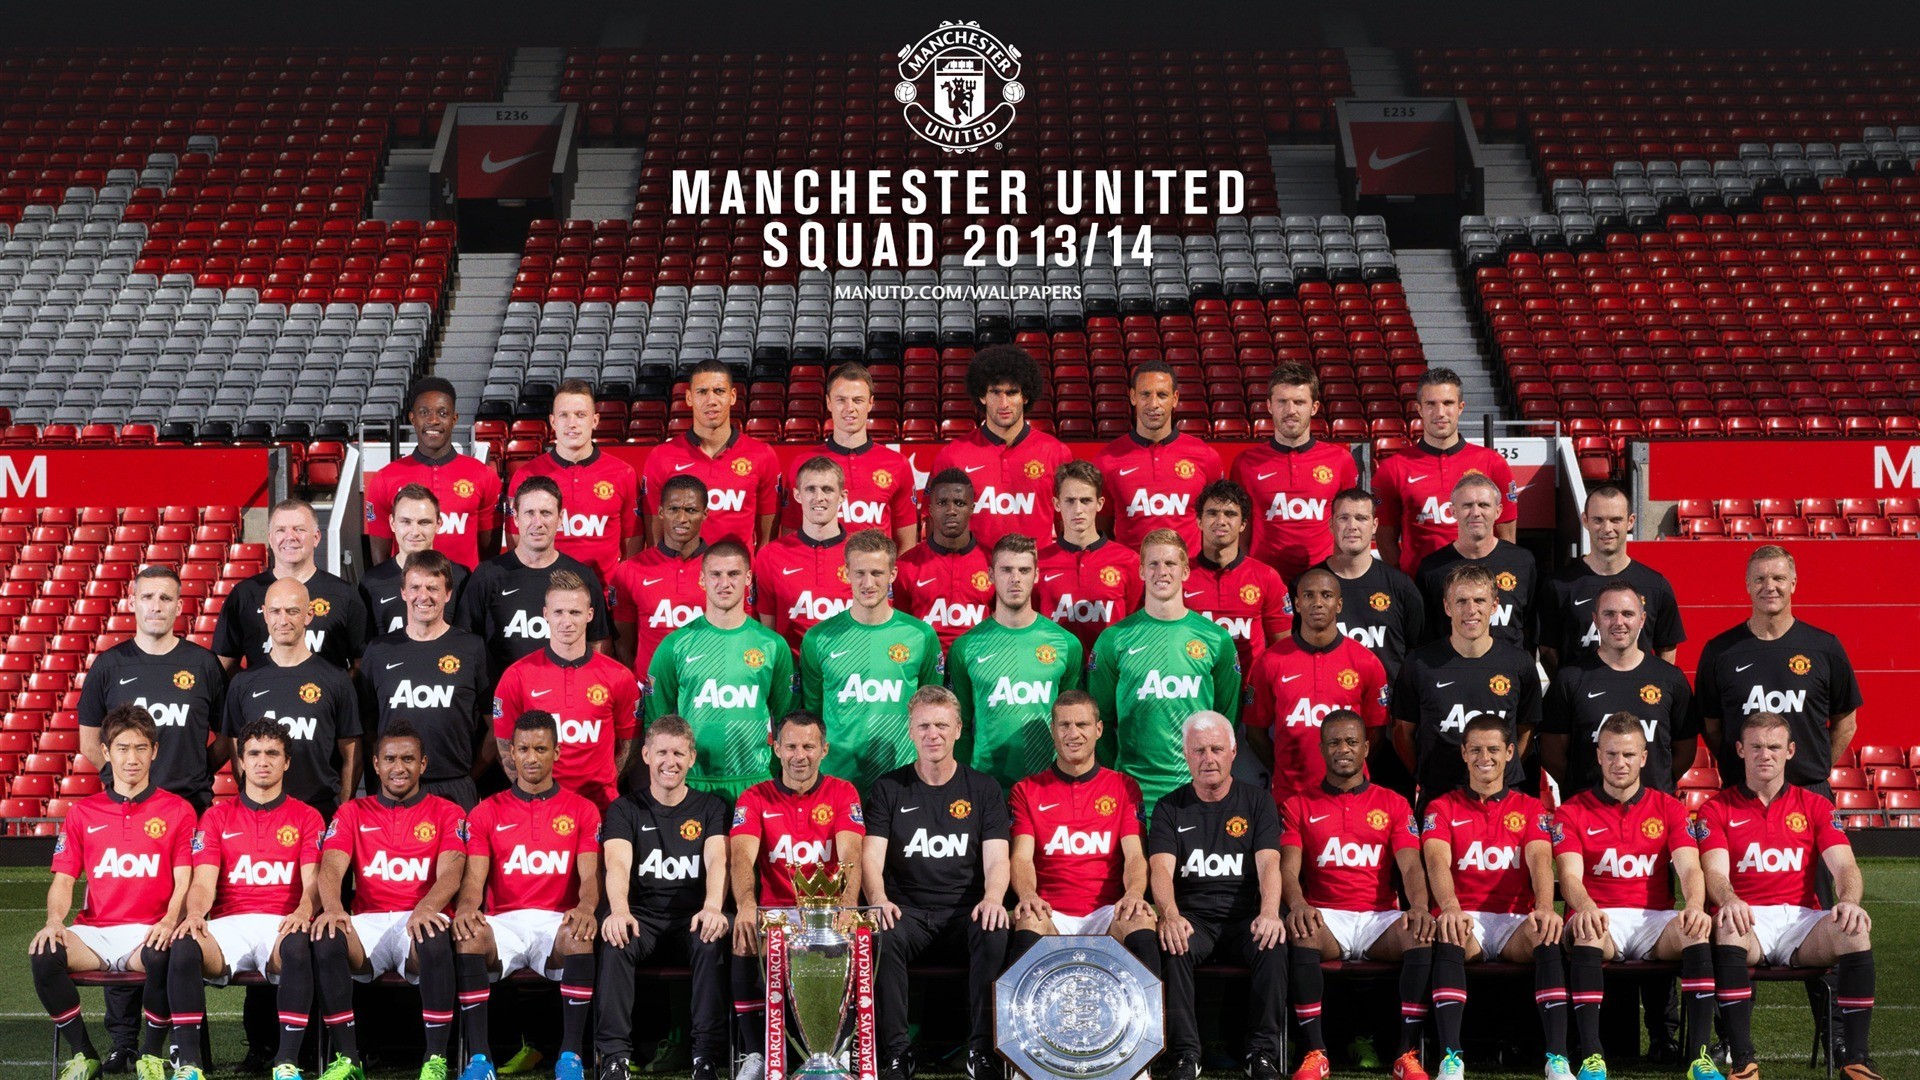 hinh nen manchester united 26 - wallpaper free download